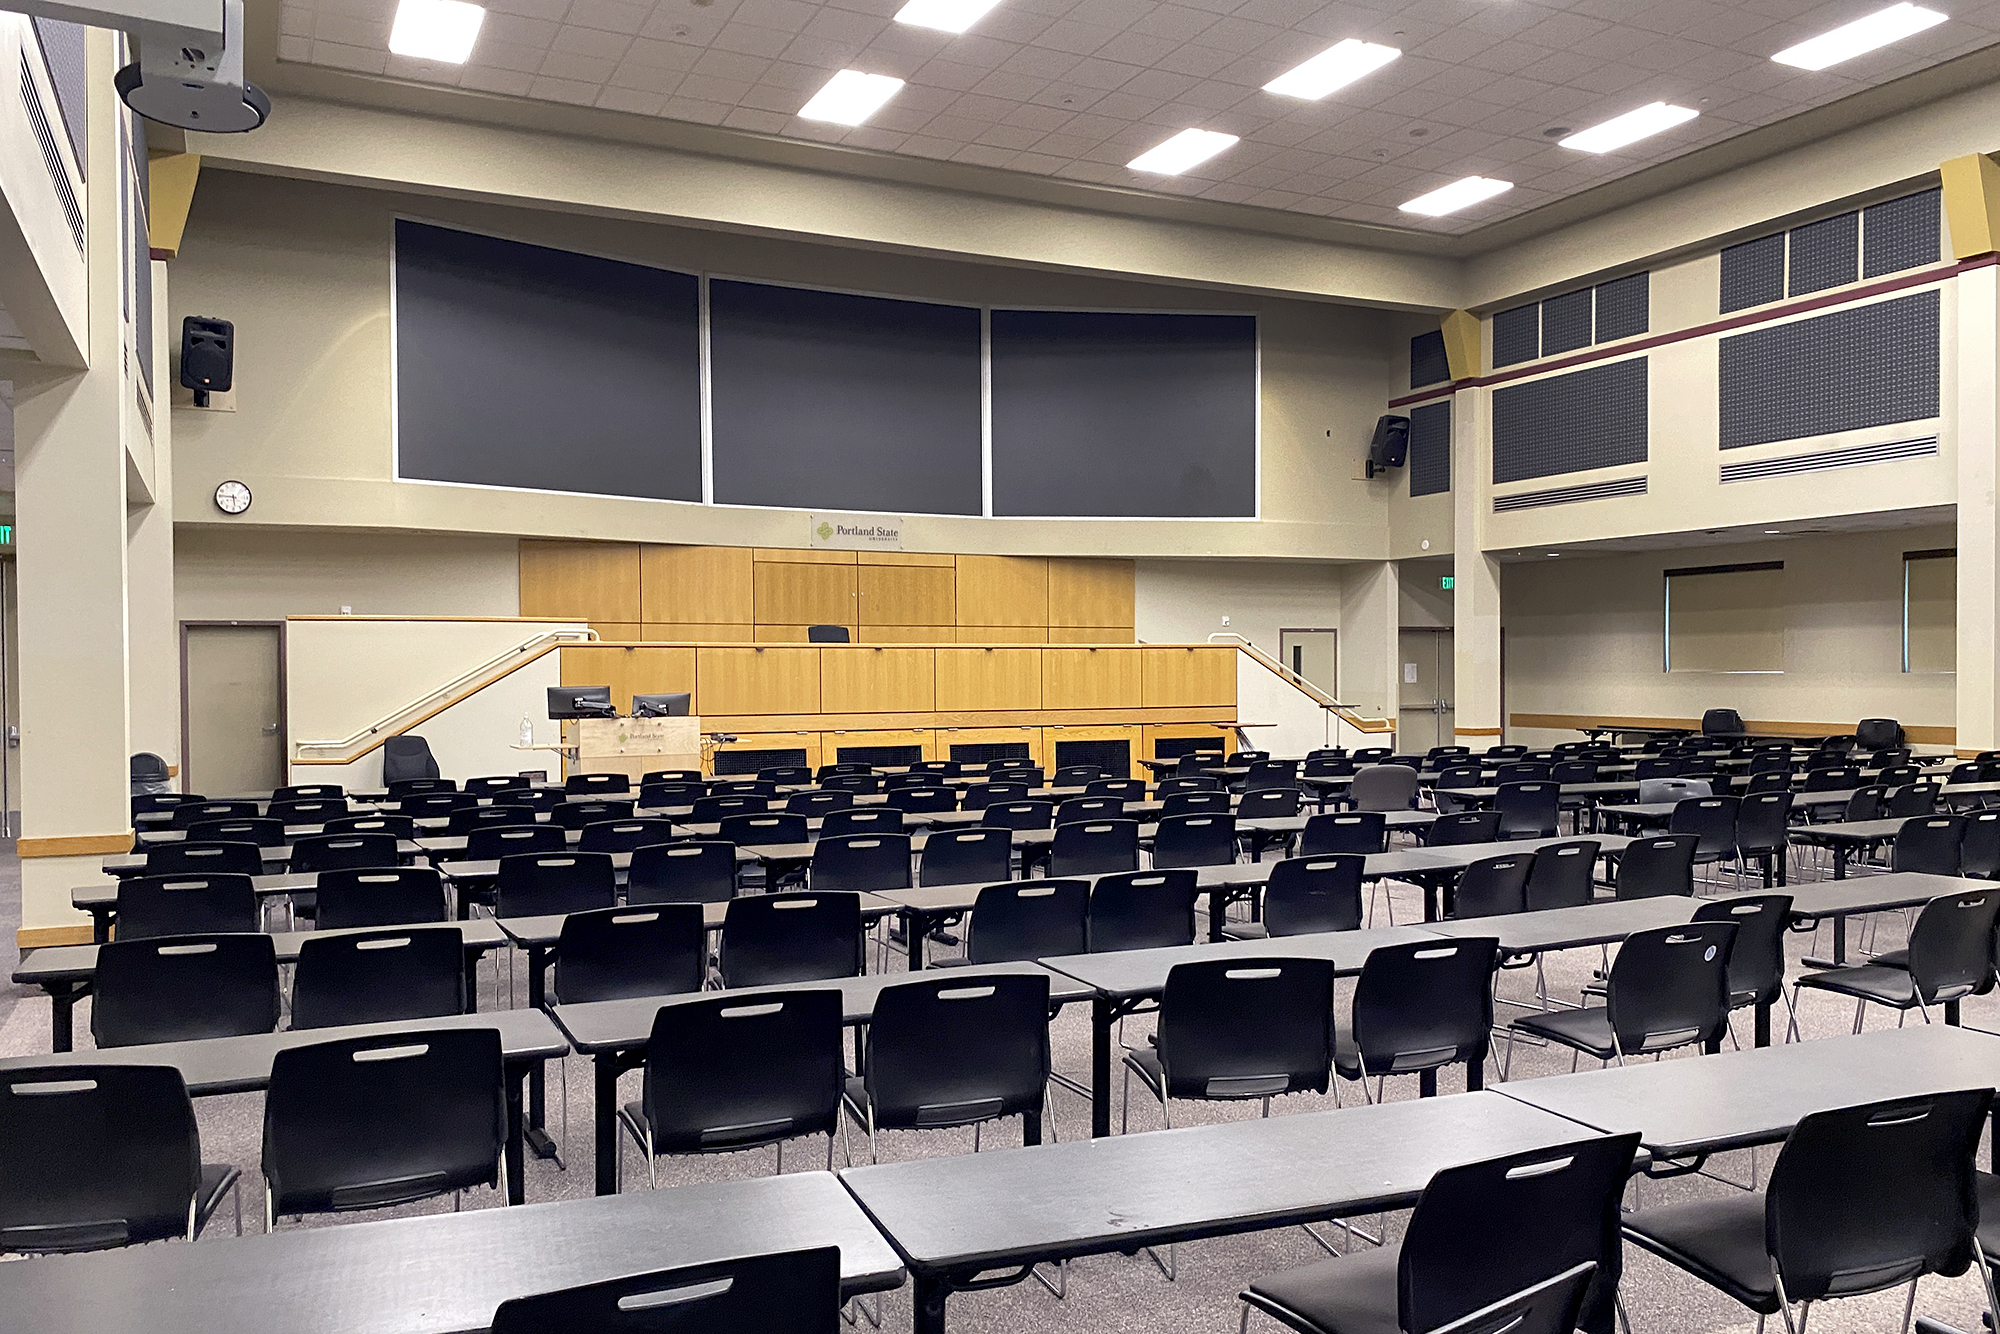 Hoffmann Hall consists of a main floor with a raised lectern platform, three large video screens above, computer-controlled audio and video equipment. Rows of chairs and class tables fill the floor.